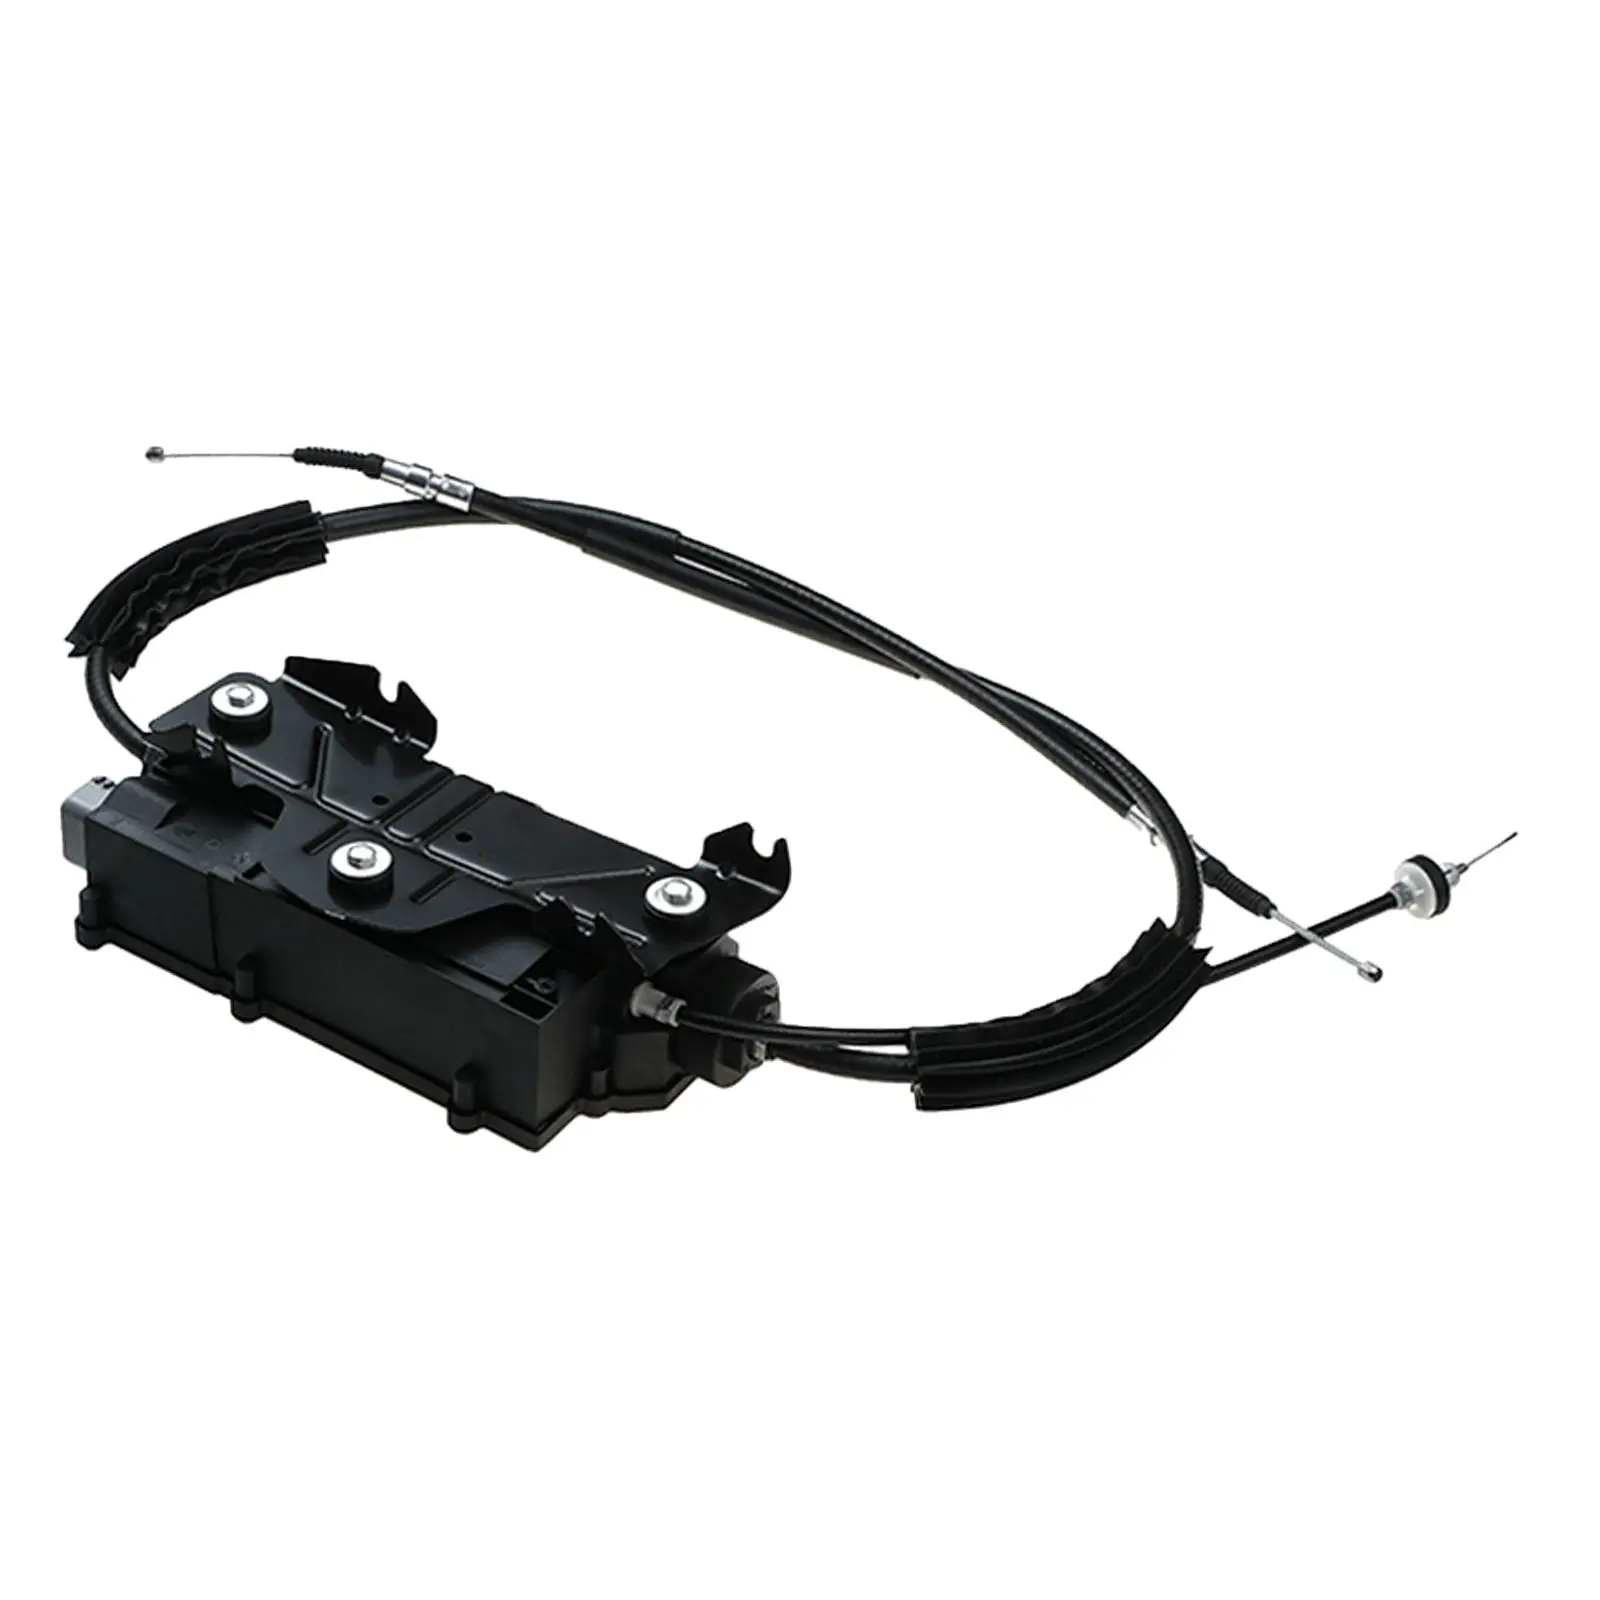 Park Brake Module, Hand Brake Actuator, Parking Brake Actuator With Control Unit, Fit for  5 Series GT F07 09-16